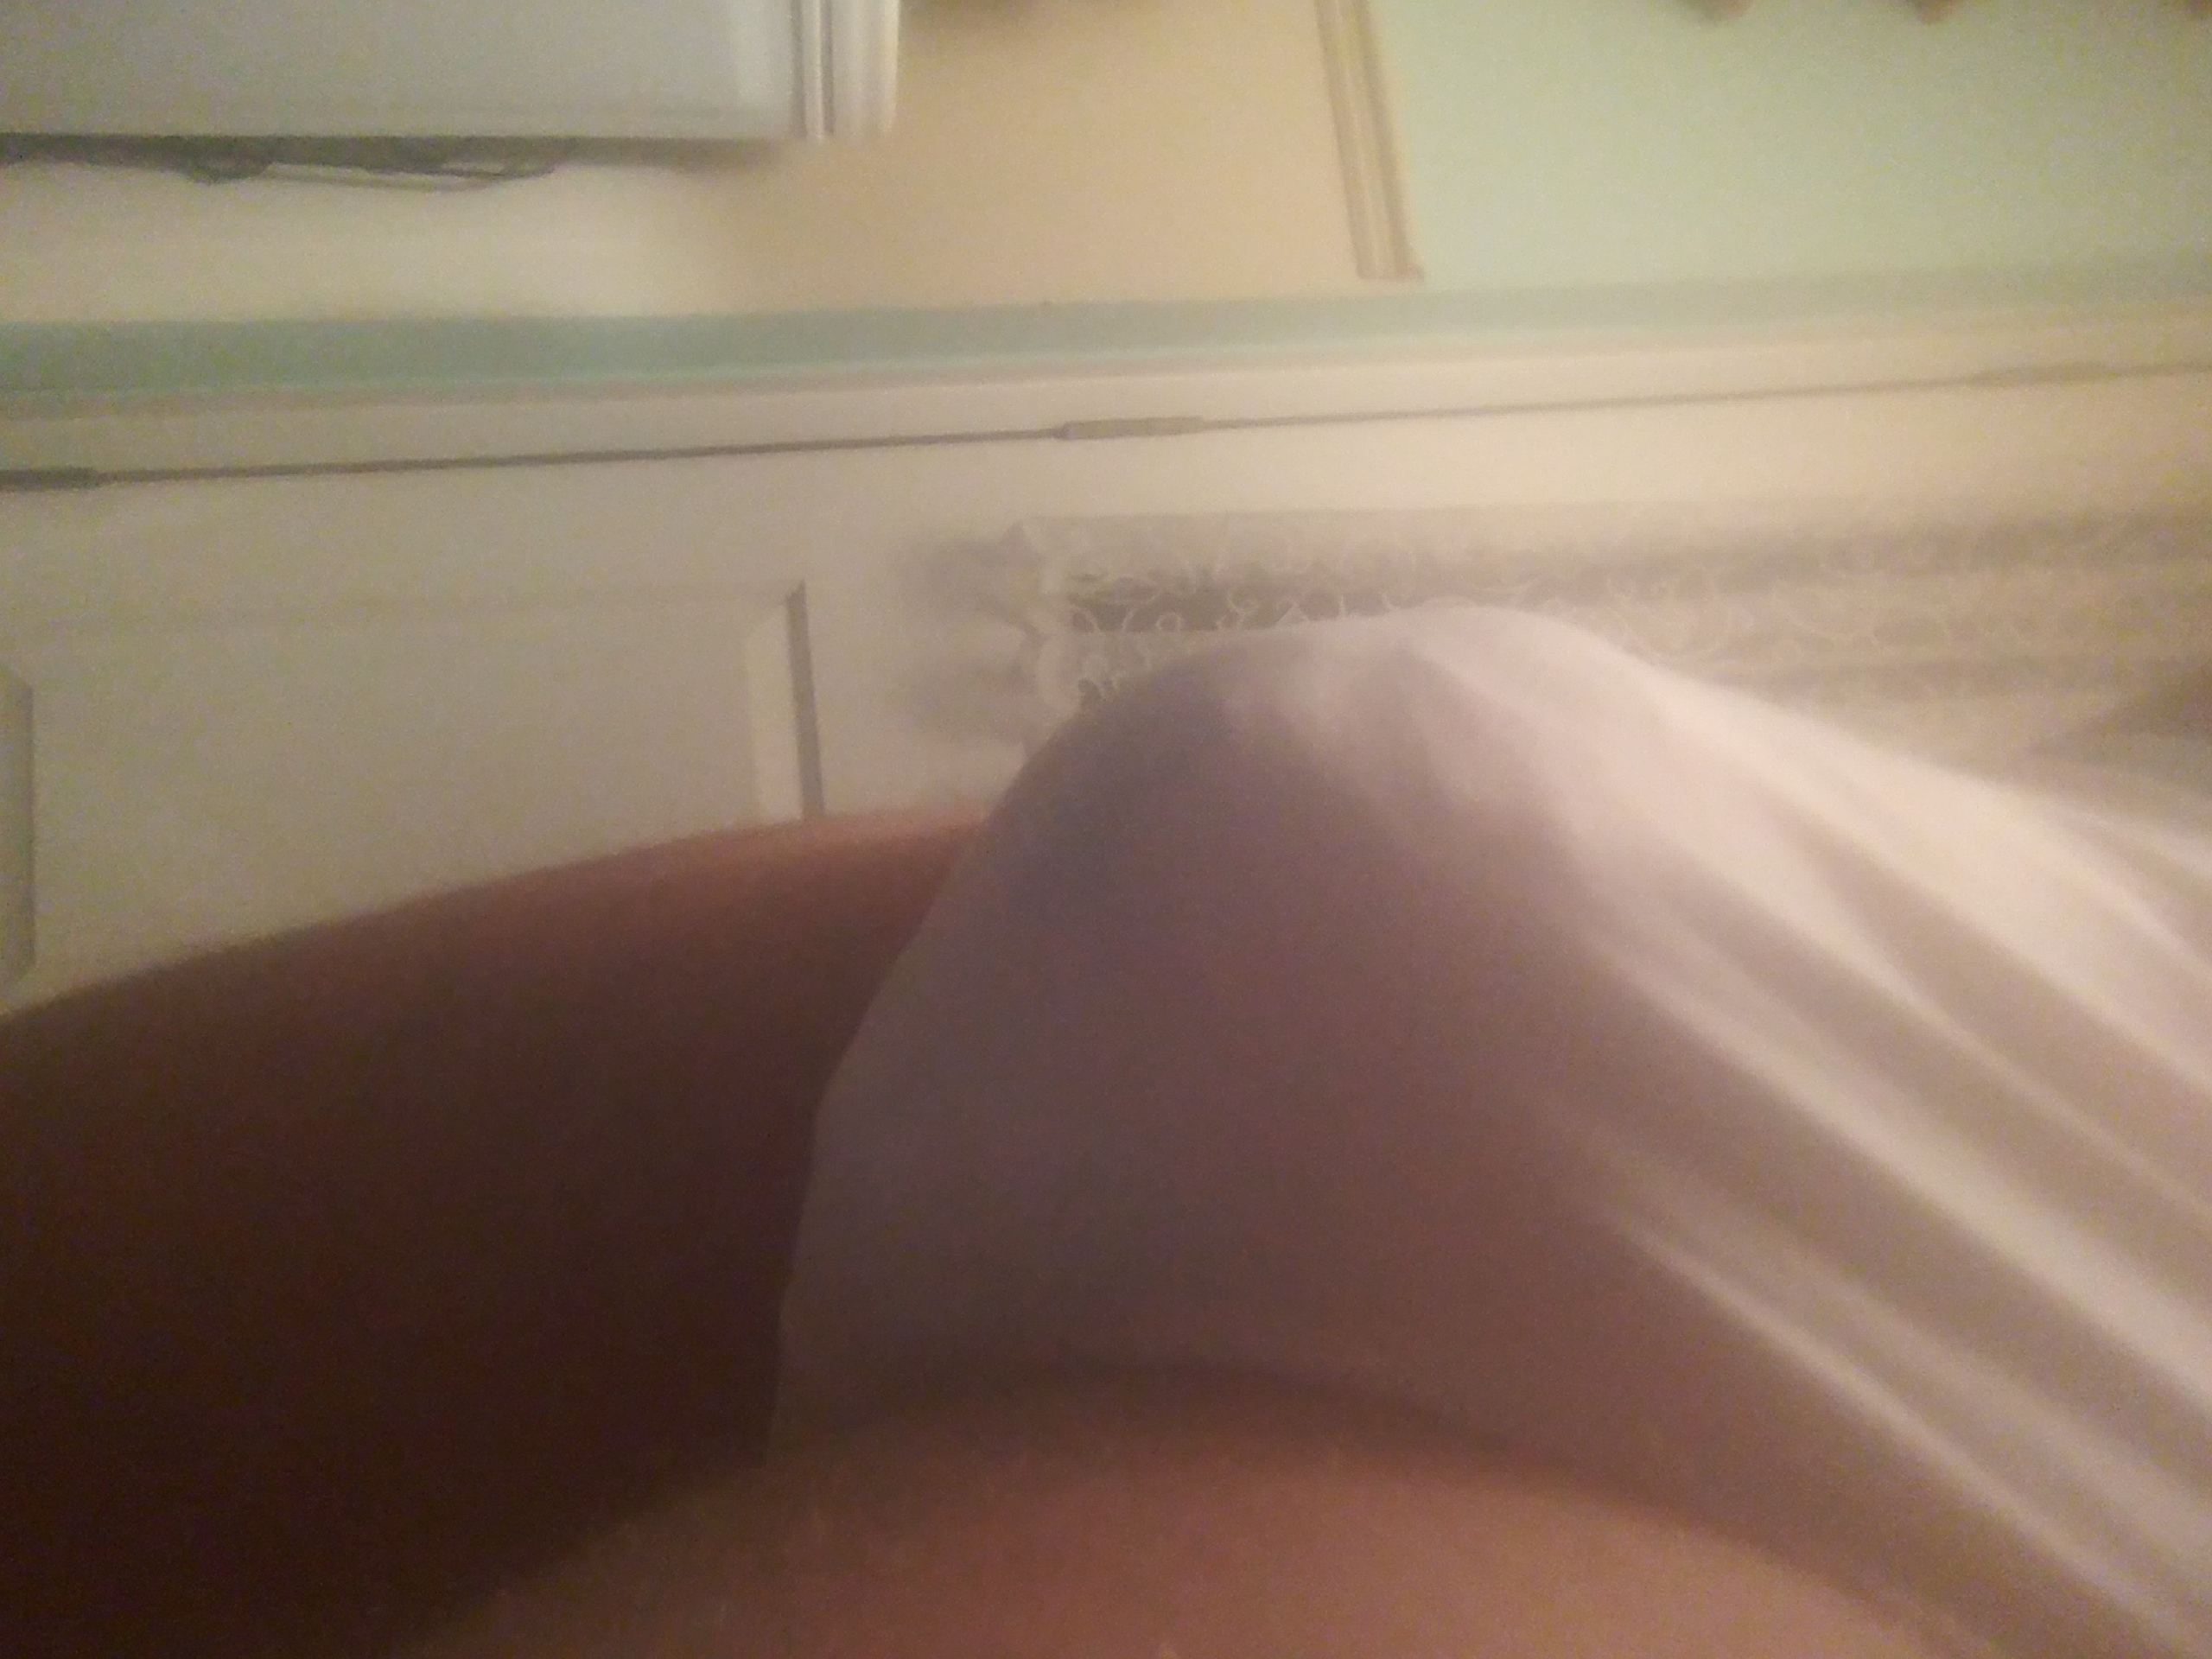 Me wetting baby diapers